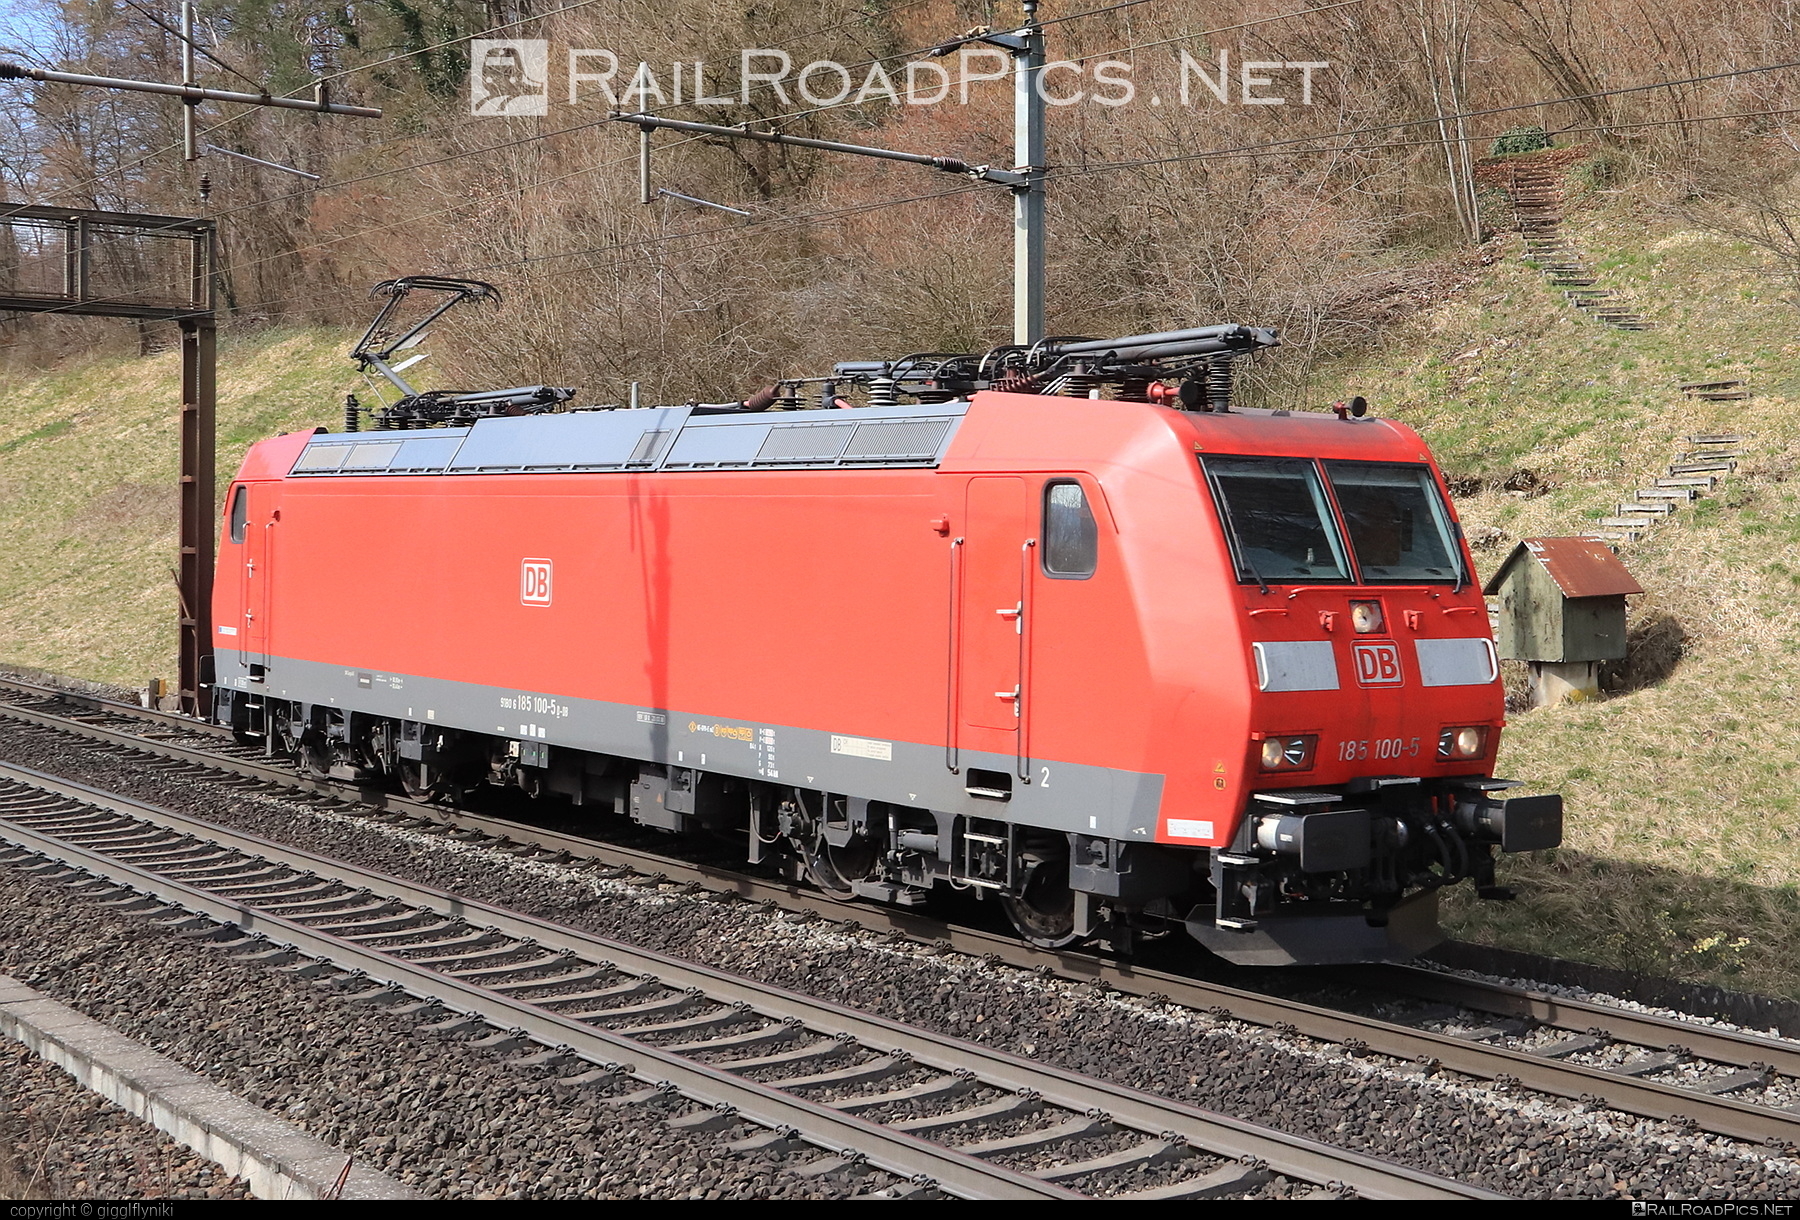 Bombardier TRAXX F140 AC1 - 185 100-5 operated by DB Cargo AG #bombardier #bombardiertraxx #db #dbcargo #dbcargoag #deutschebahn #traxx #traxxf140 #traxxf140ac #traxxf140ac1